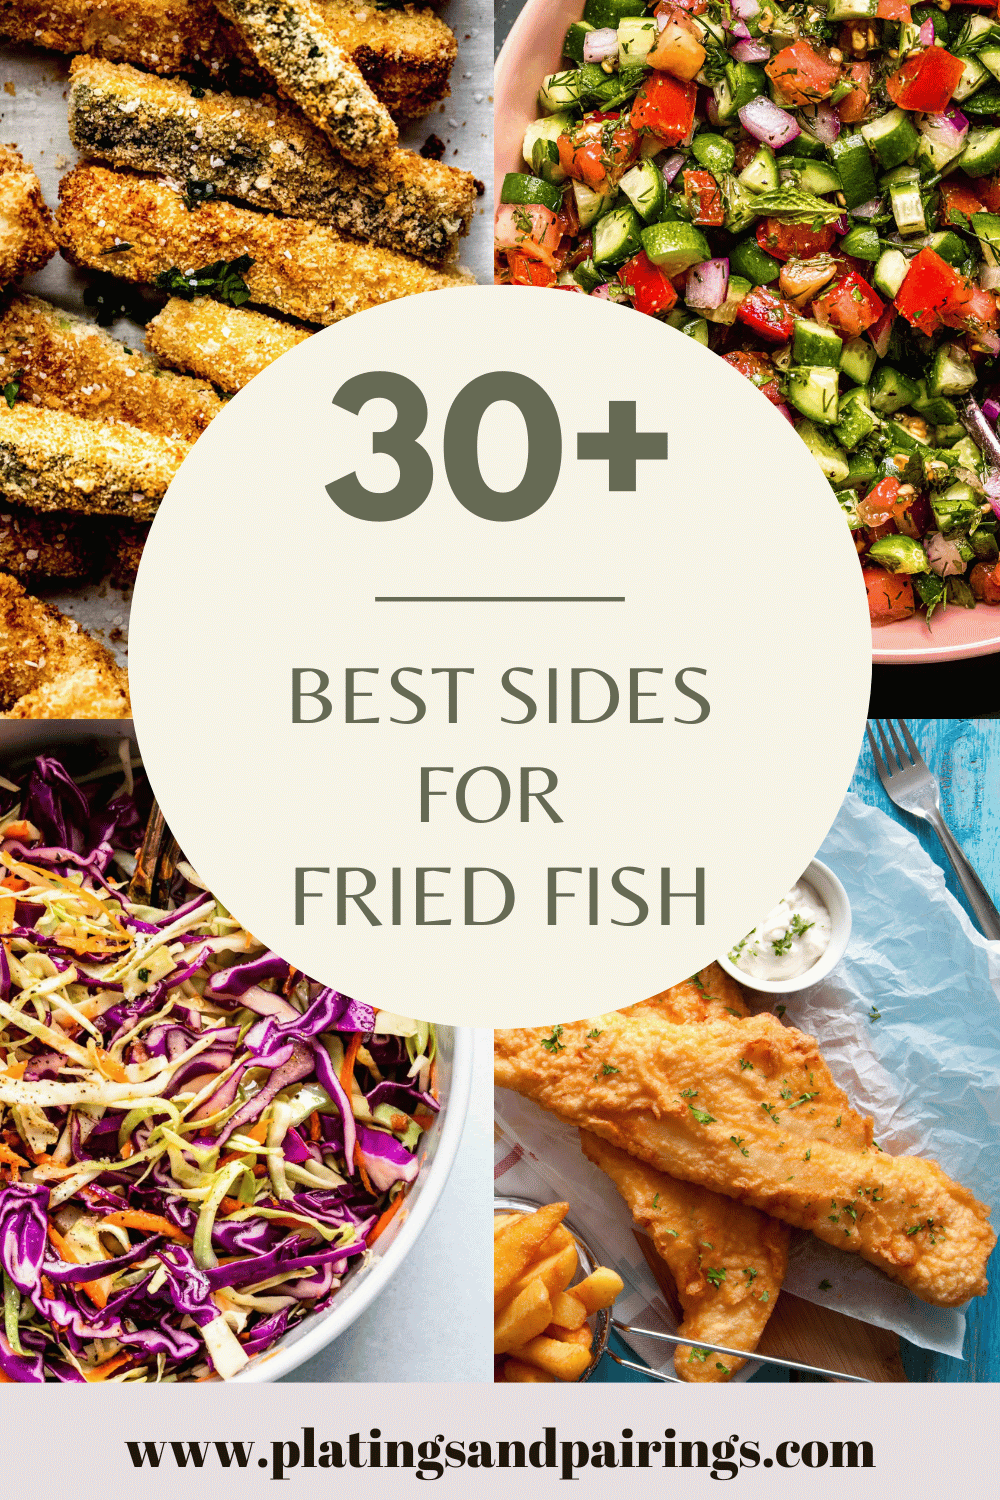 Collage of sides for fried fish with text overlay.